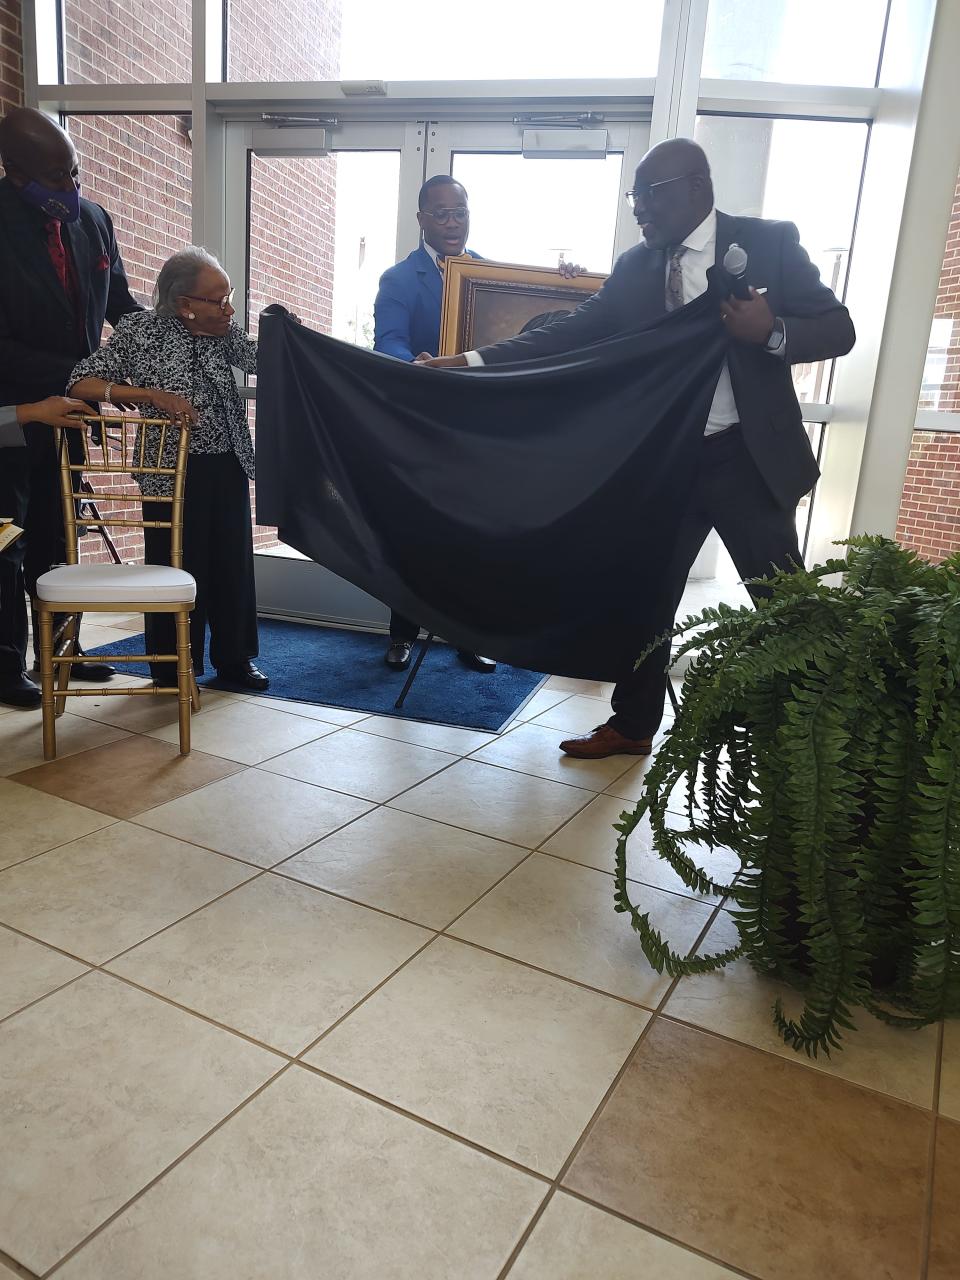 Anne Richardson Gayles-Felton was honored on June 4, 2022, on her 99th birthday, with a portrait unveiling and birthday party at Fort Valley University in Georgia.